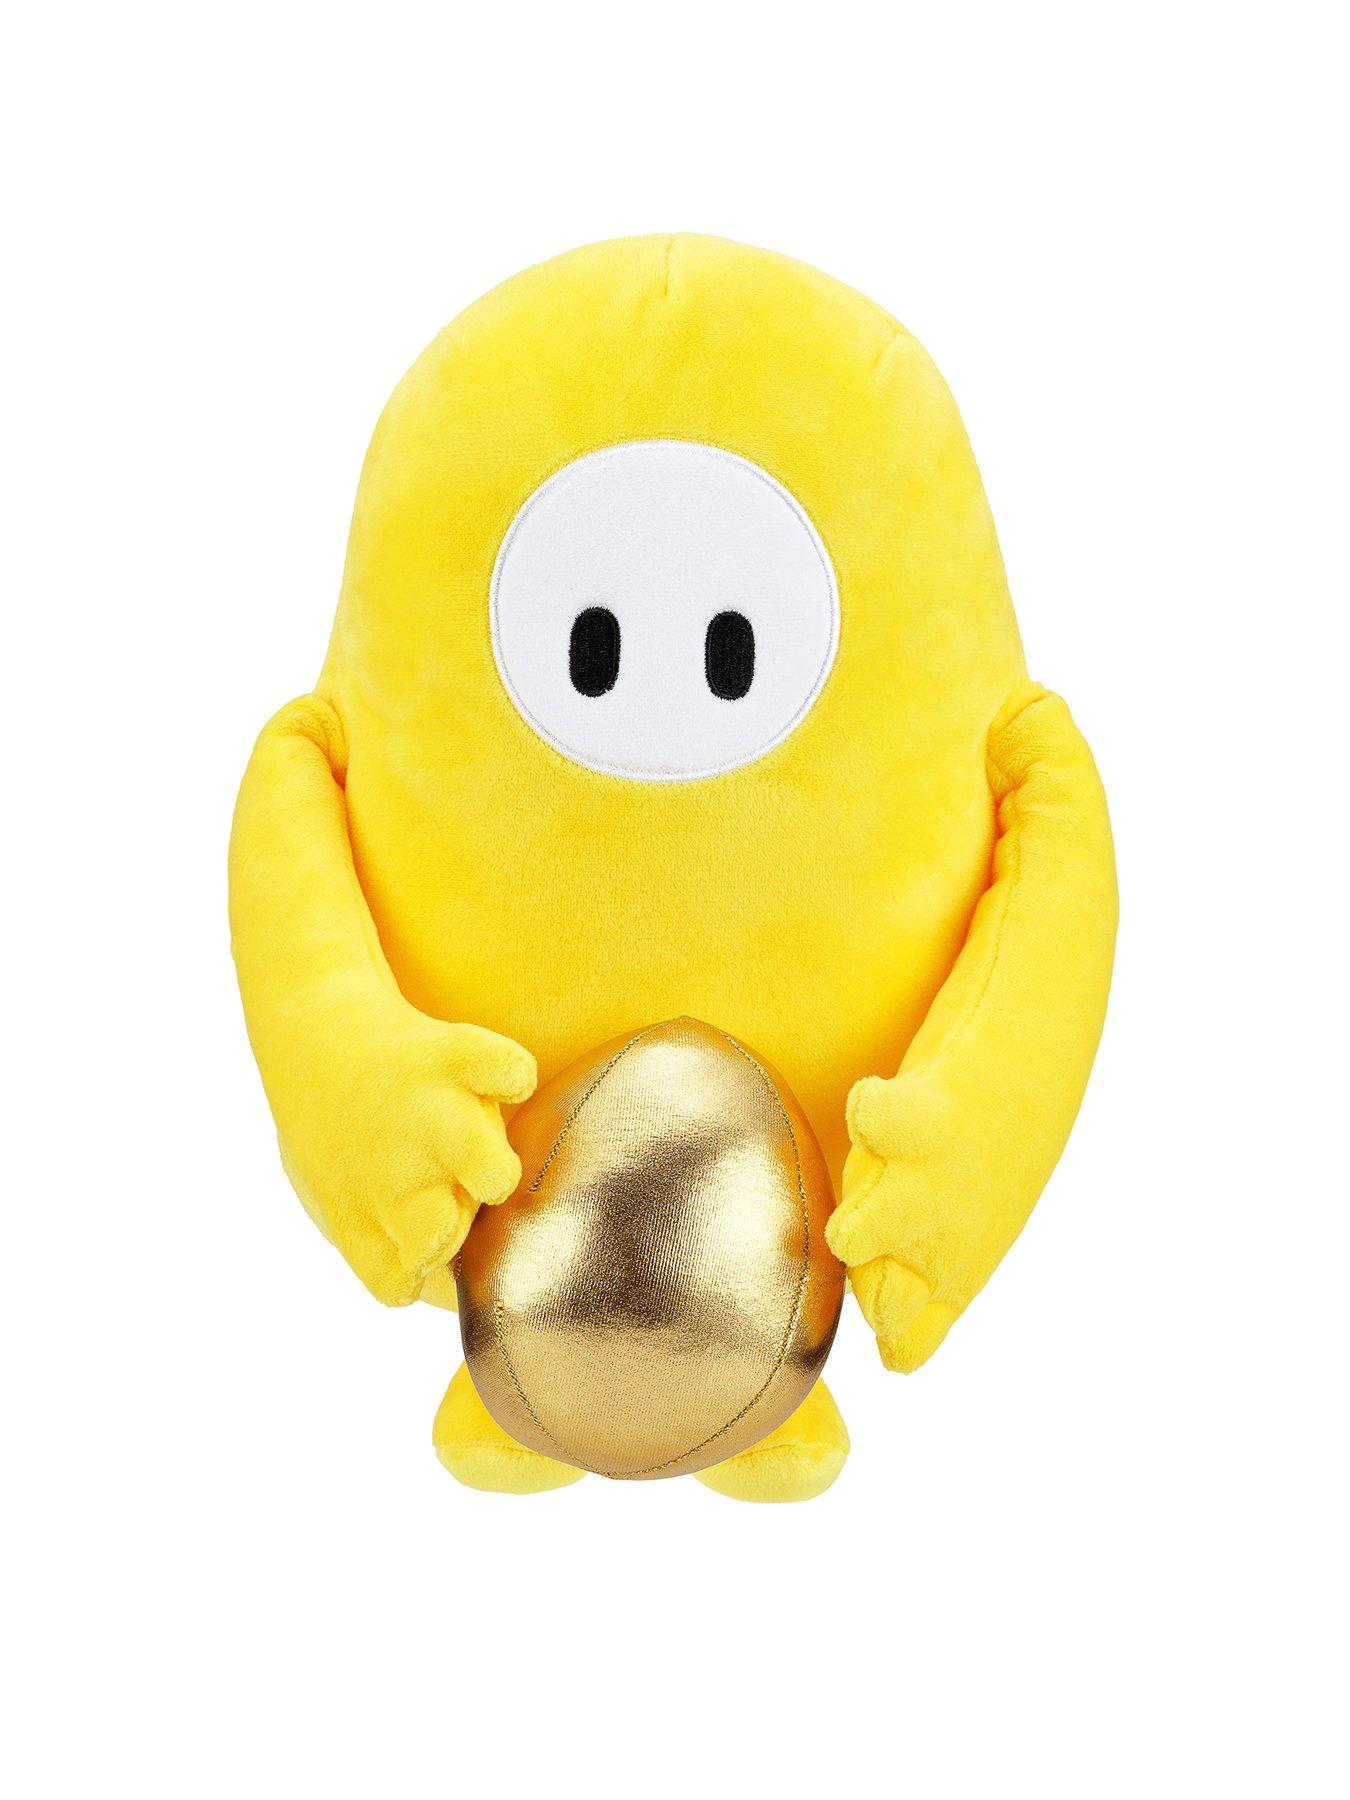 Fall Guys Pigeon Bean Skin Official Collectable 8 in a Pigeon Skin Costume  Cuddly Deluxe Plush Toy Series 1, Toys for Kids, Ages 13+ 